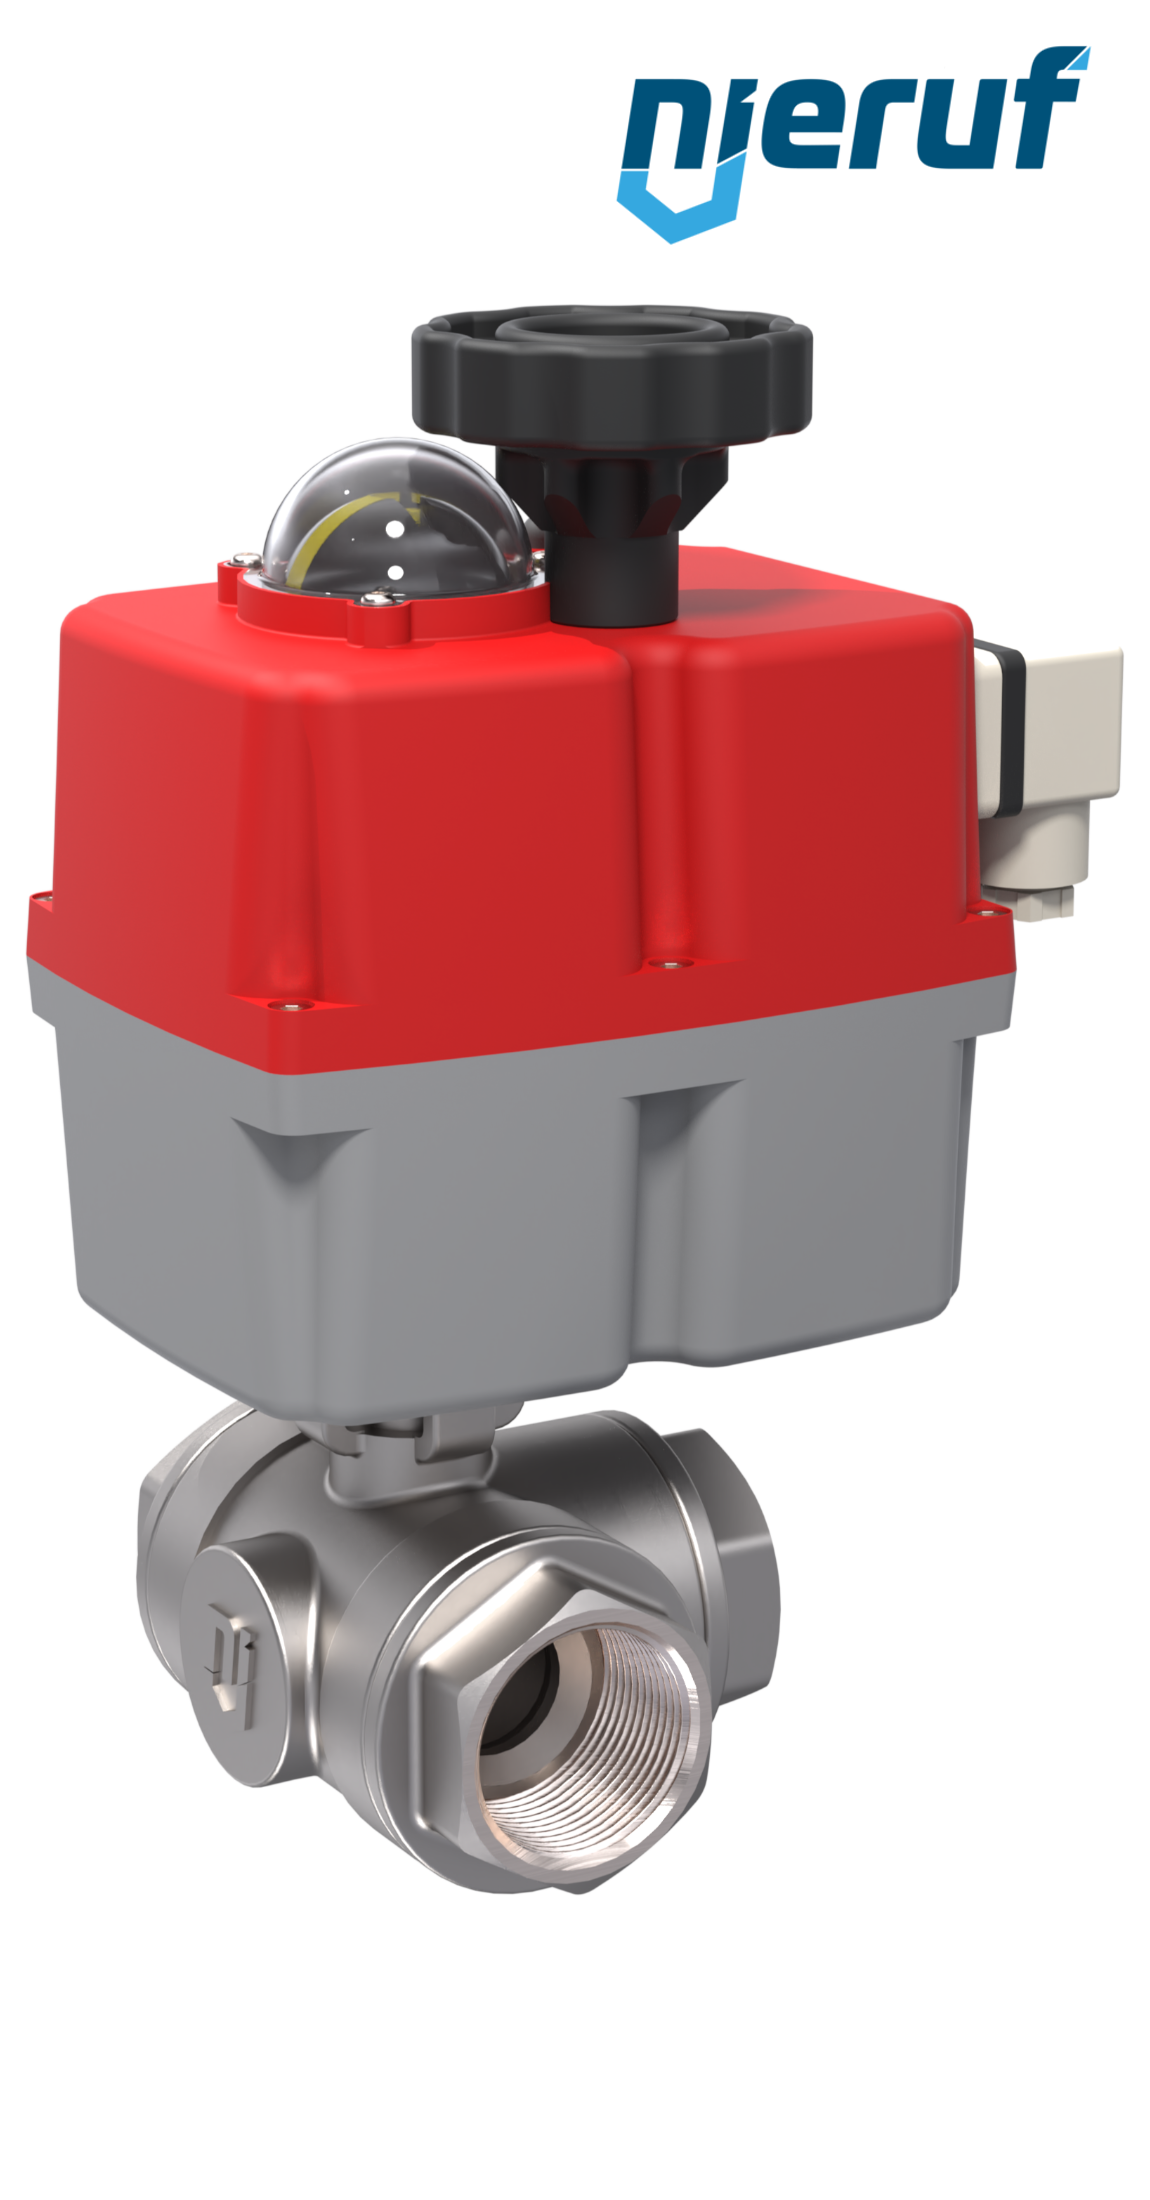 3 way automatic-ball valve 24-240V DN32 - 1 1/4" inch stainless steel reduced port design with T drilling